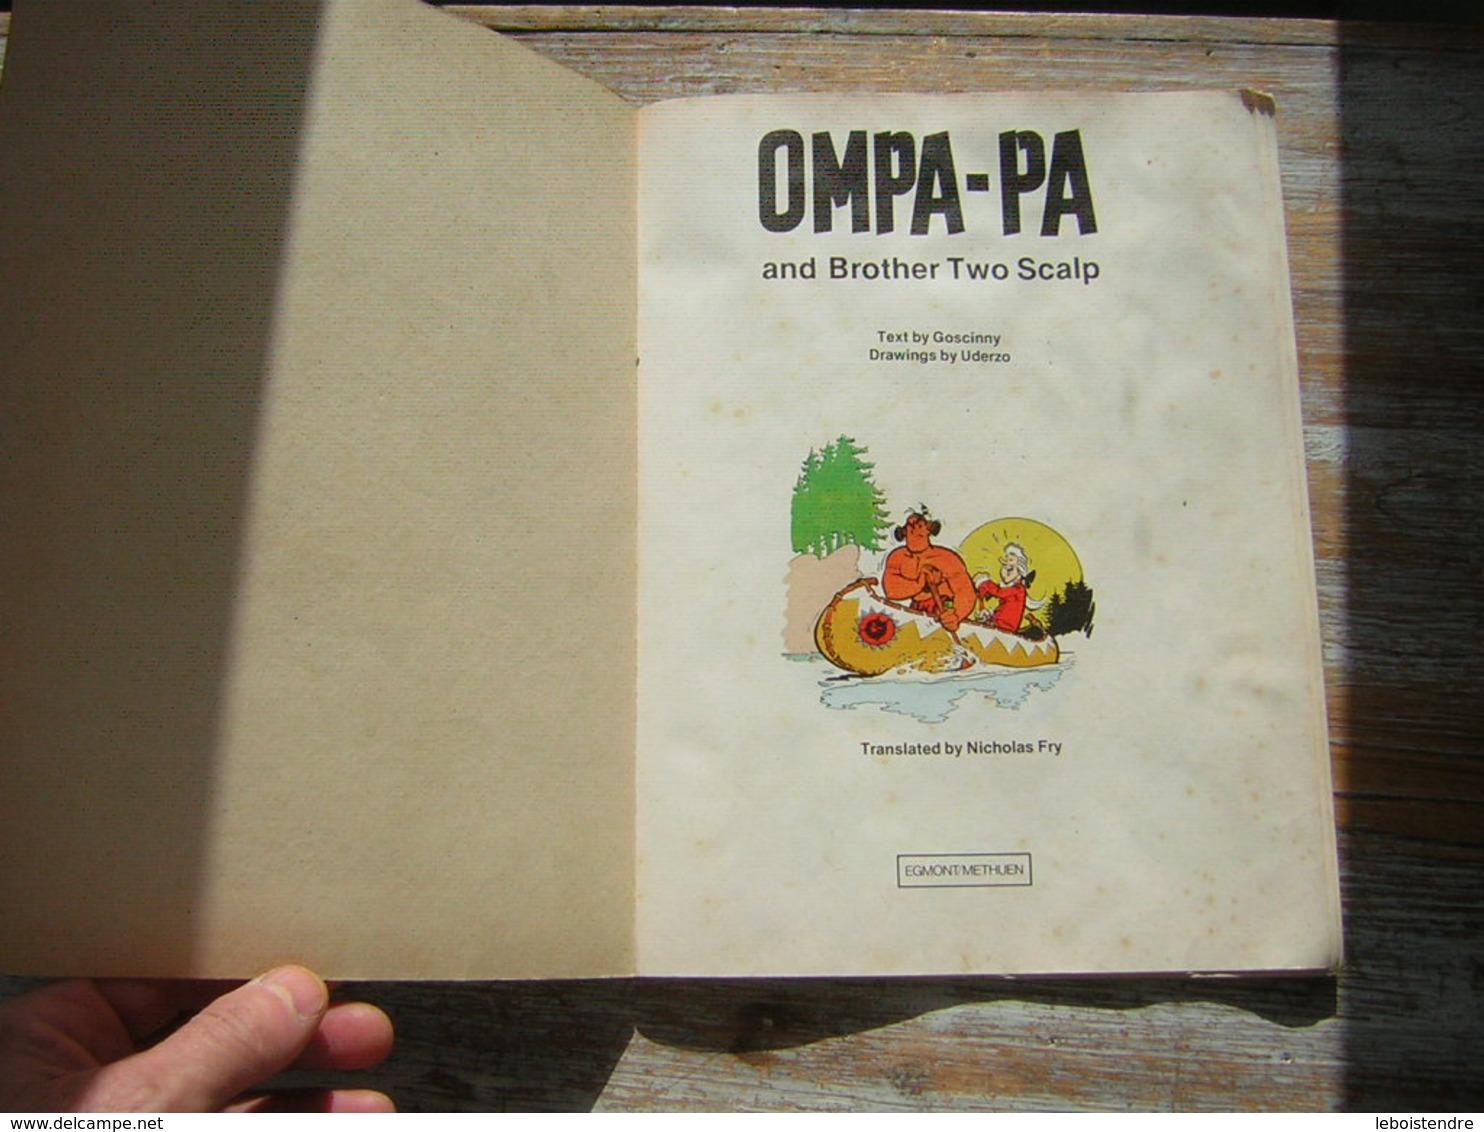 OMPA PA AND BROTHER TWO SCALP GOSCINNY AND UDERZO 1977 EGMONT / METHUEN